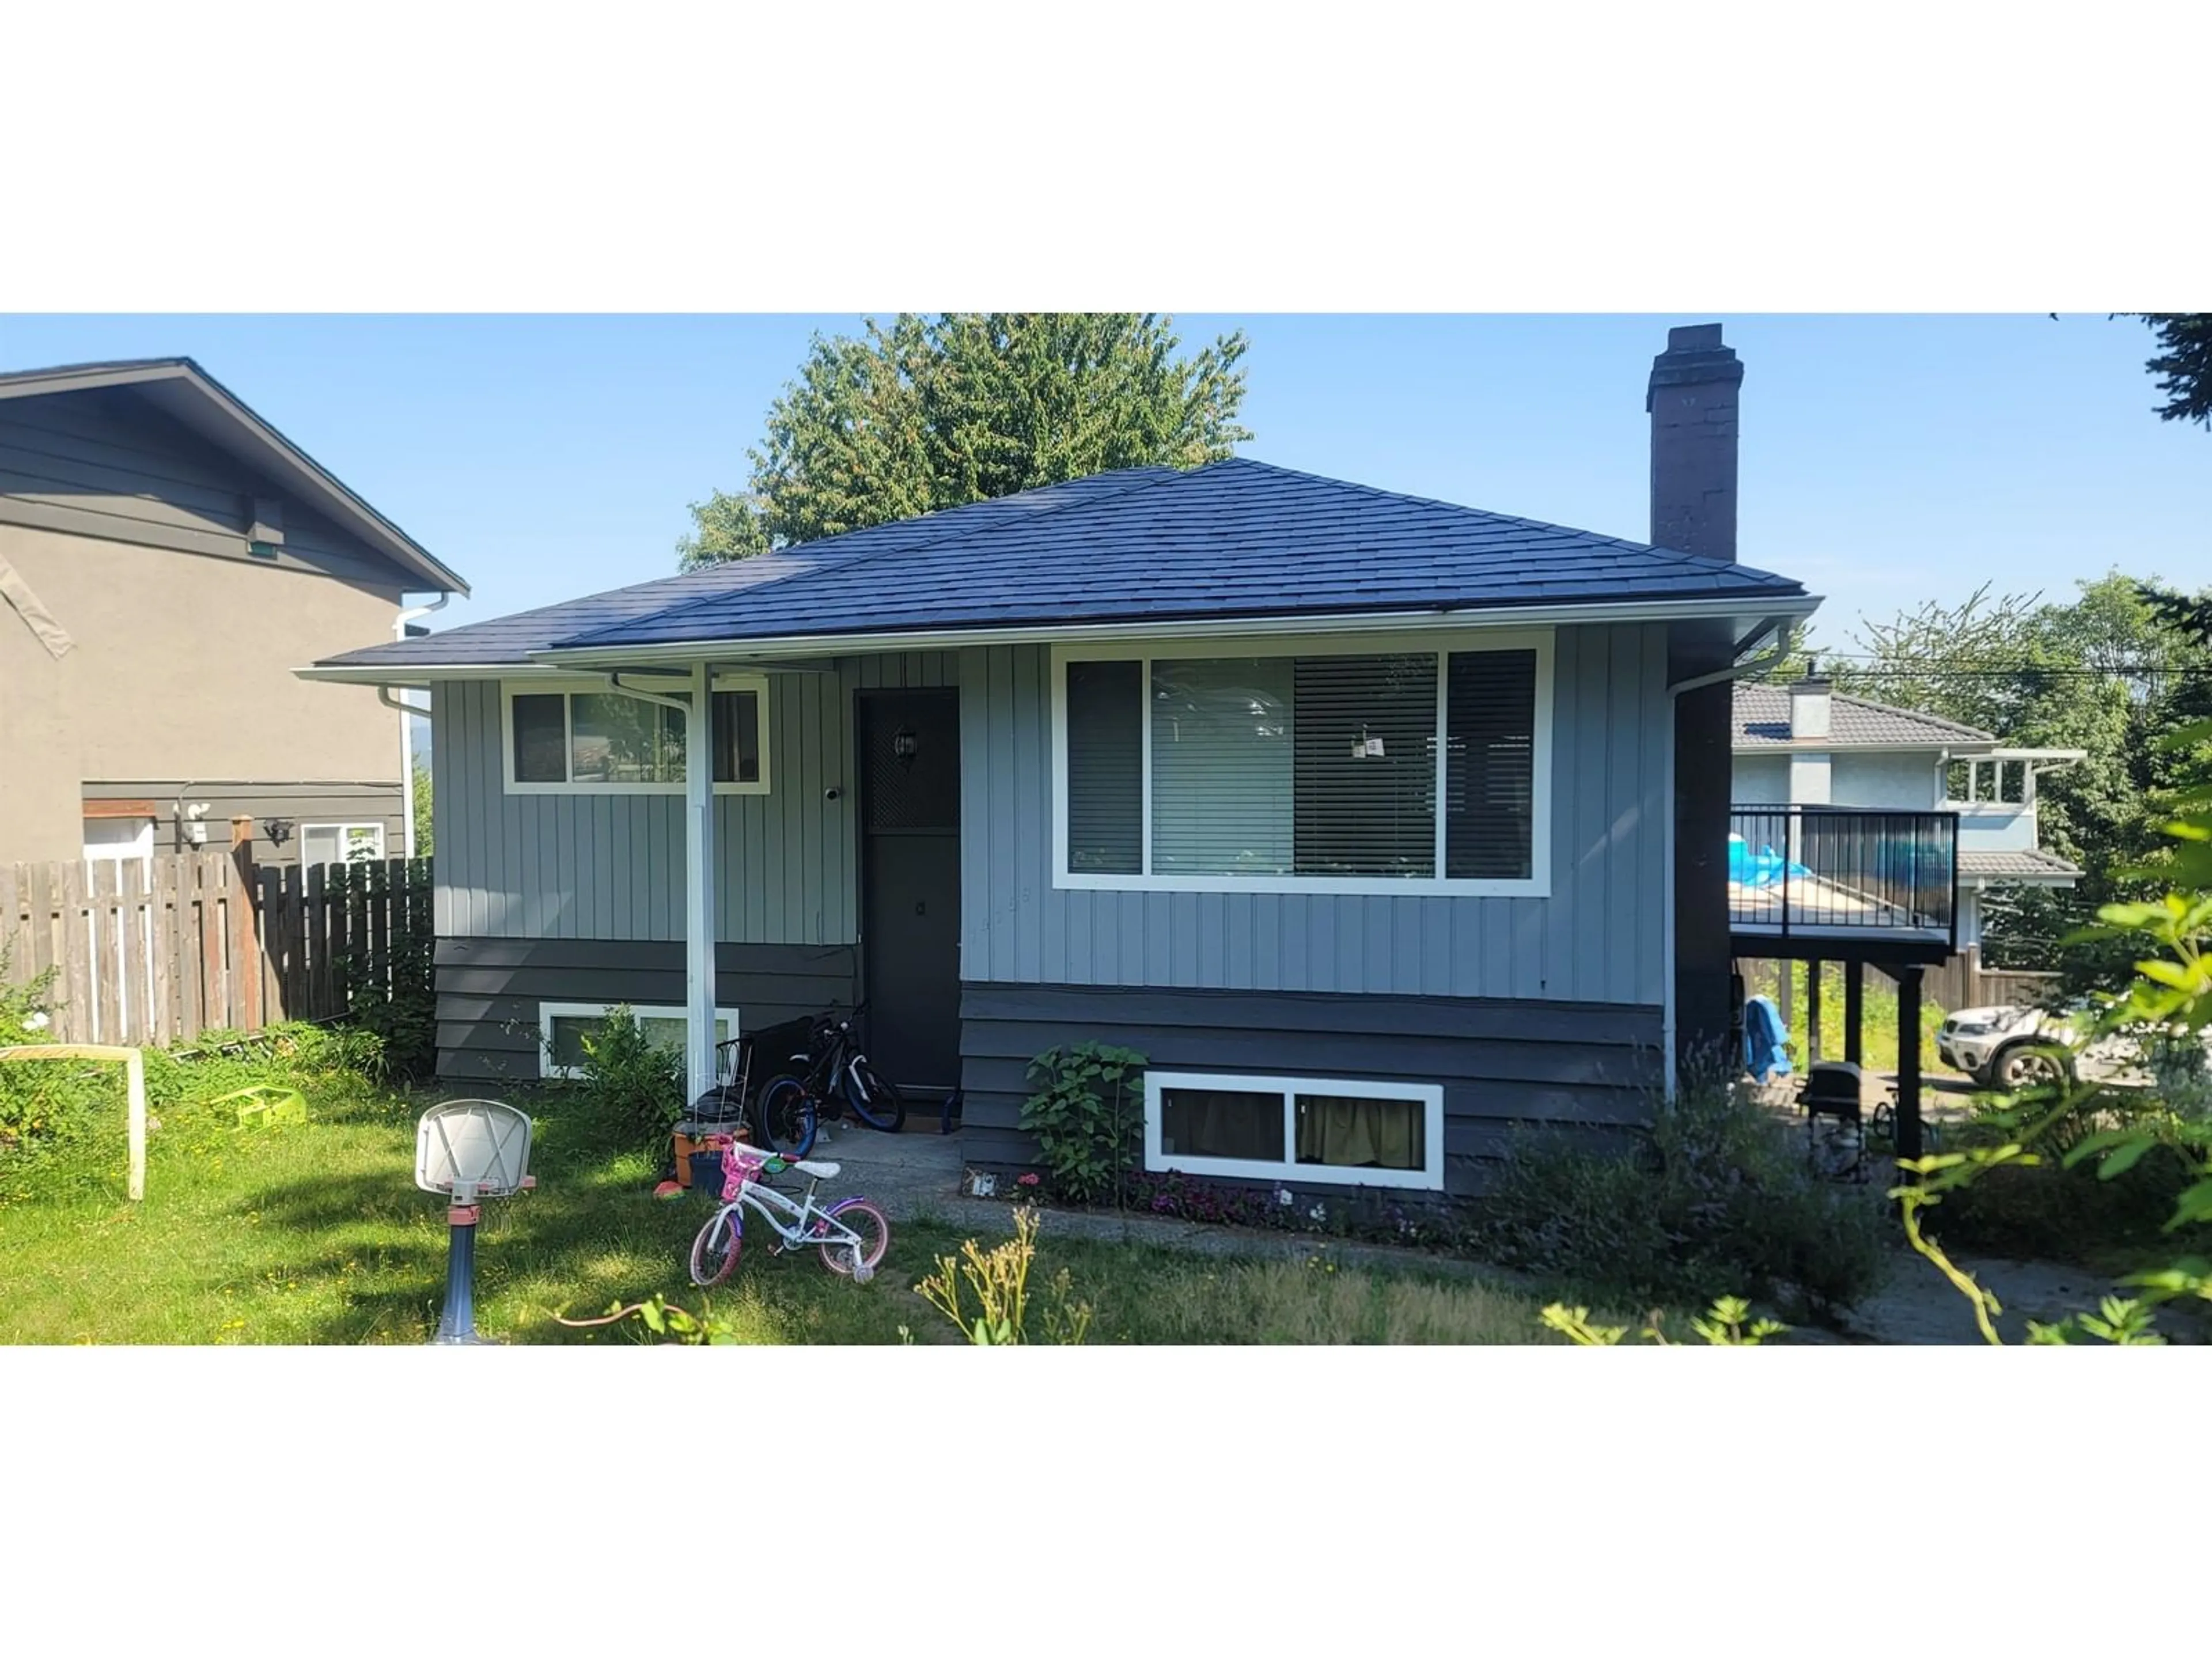 Frontside or backside of a home for 14169 115A AVENUE, Surrey British Columbia V3R2R6